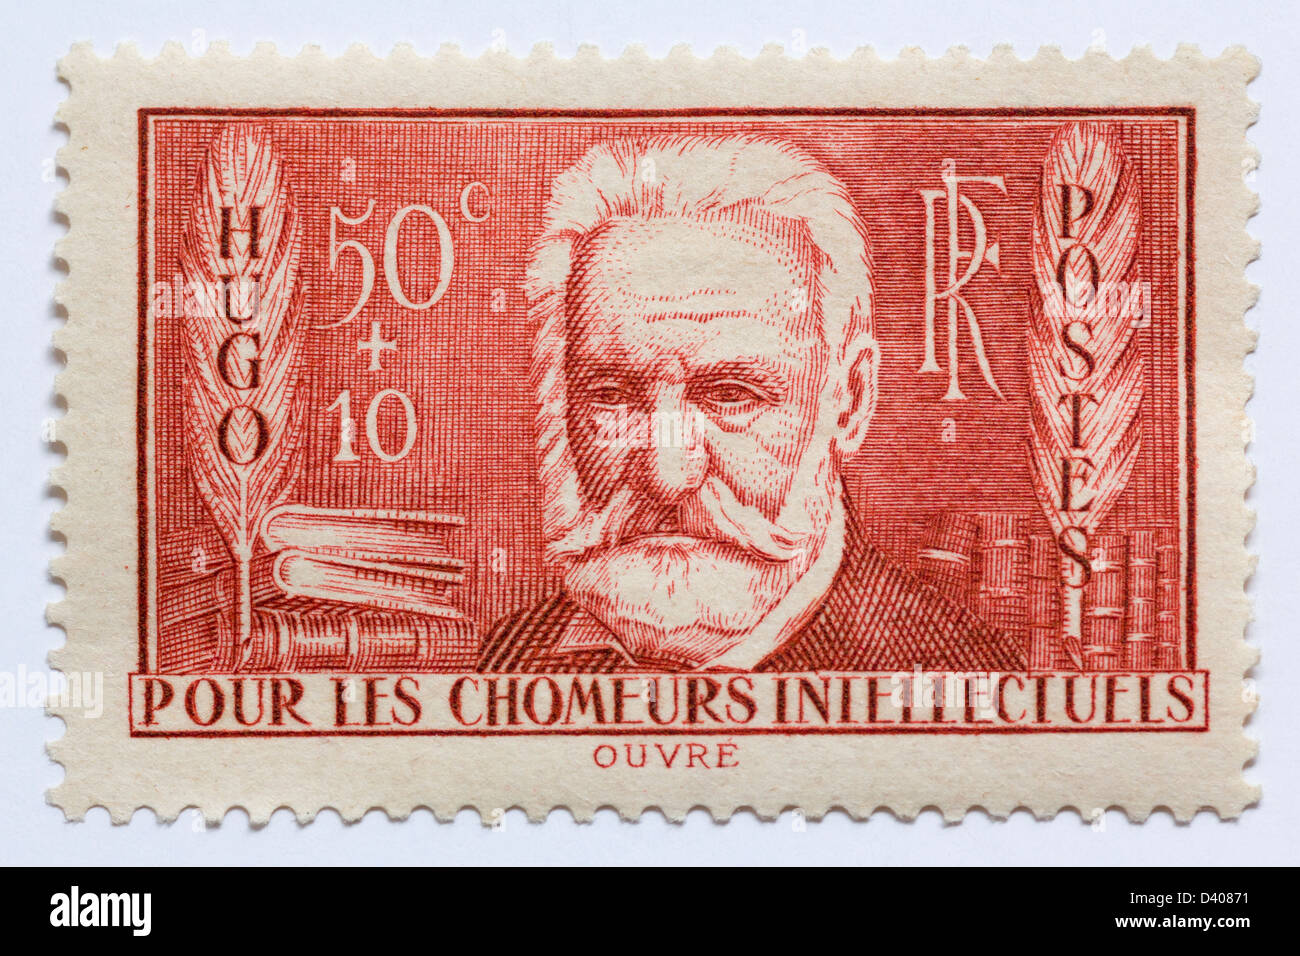 Victor Hugo on a 1936 French Stamp, which includes a supplementary 10c charge for an unemployed intellectual charitable fund. Stock Photo